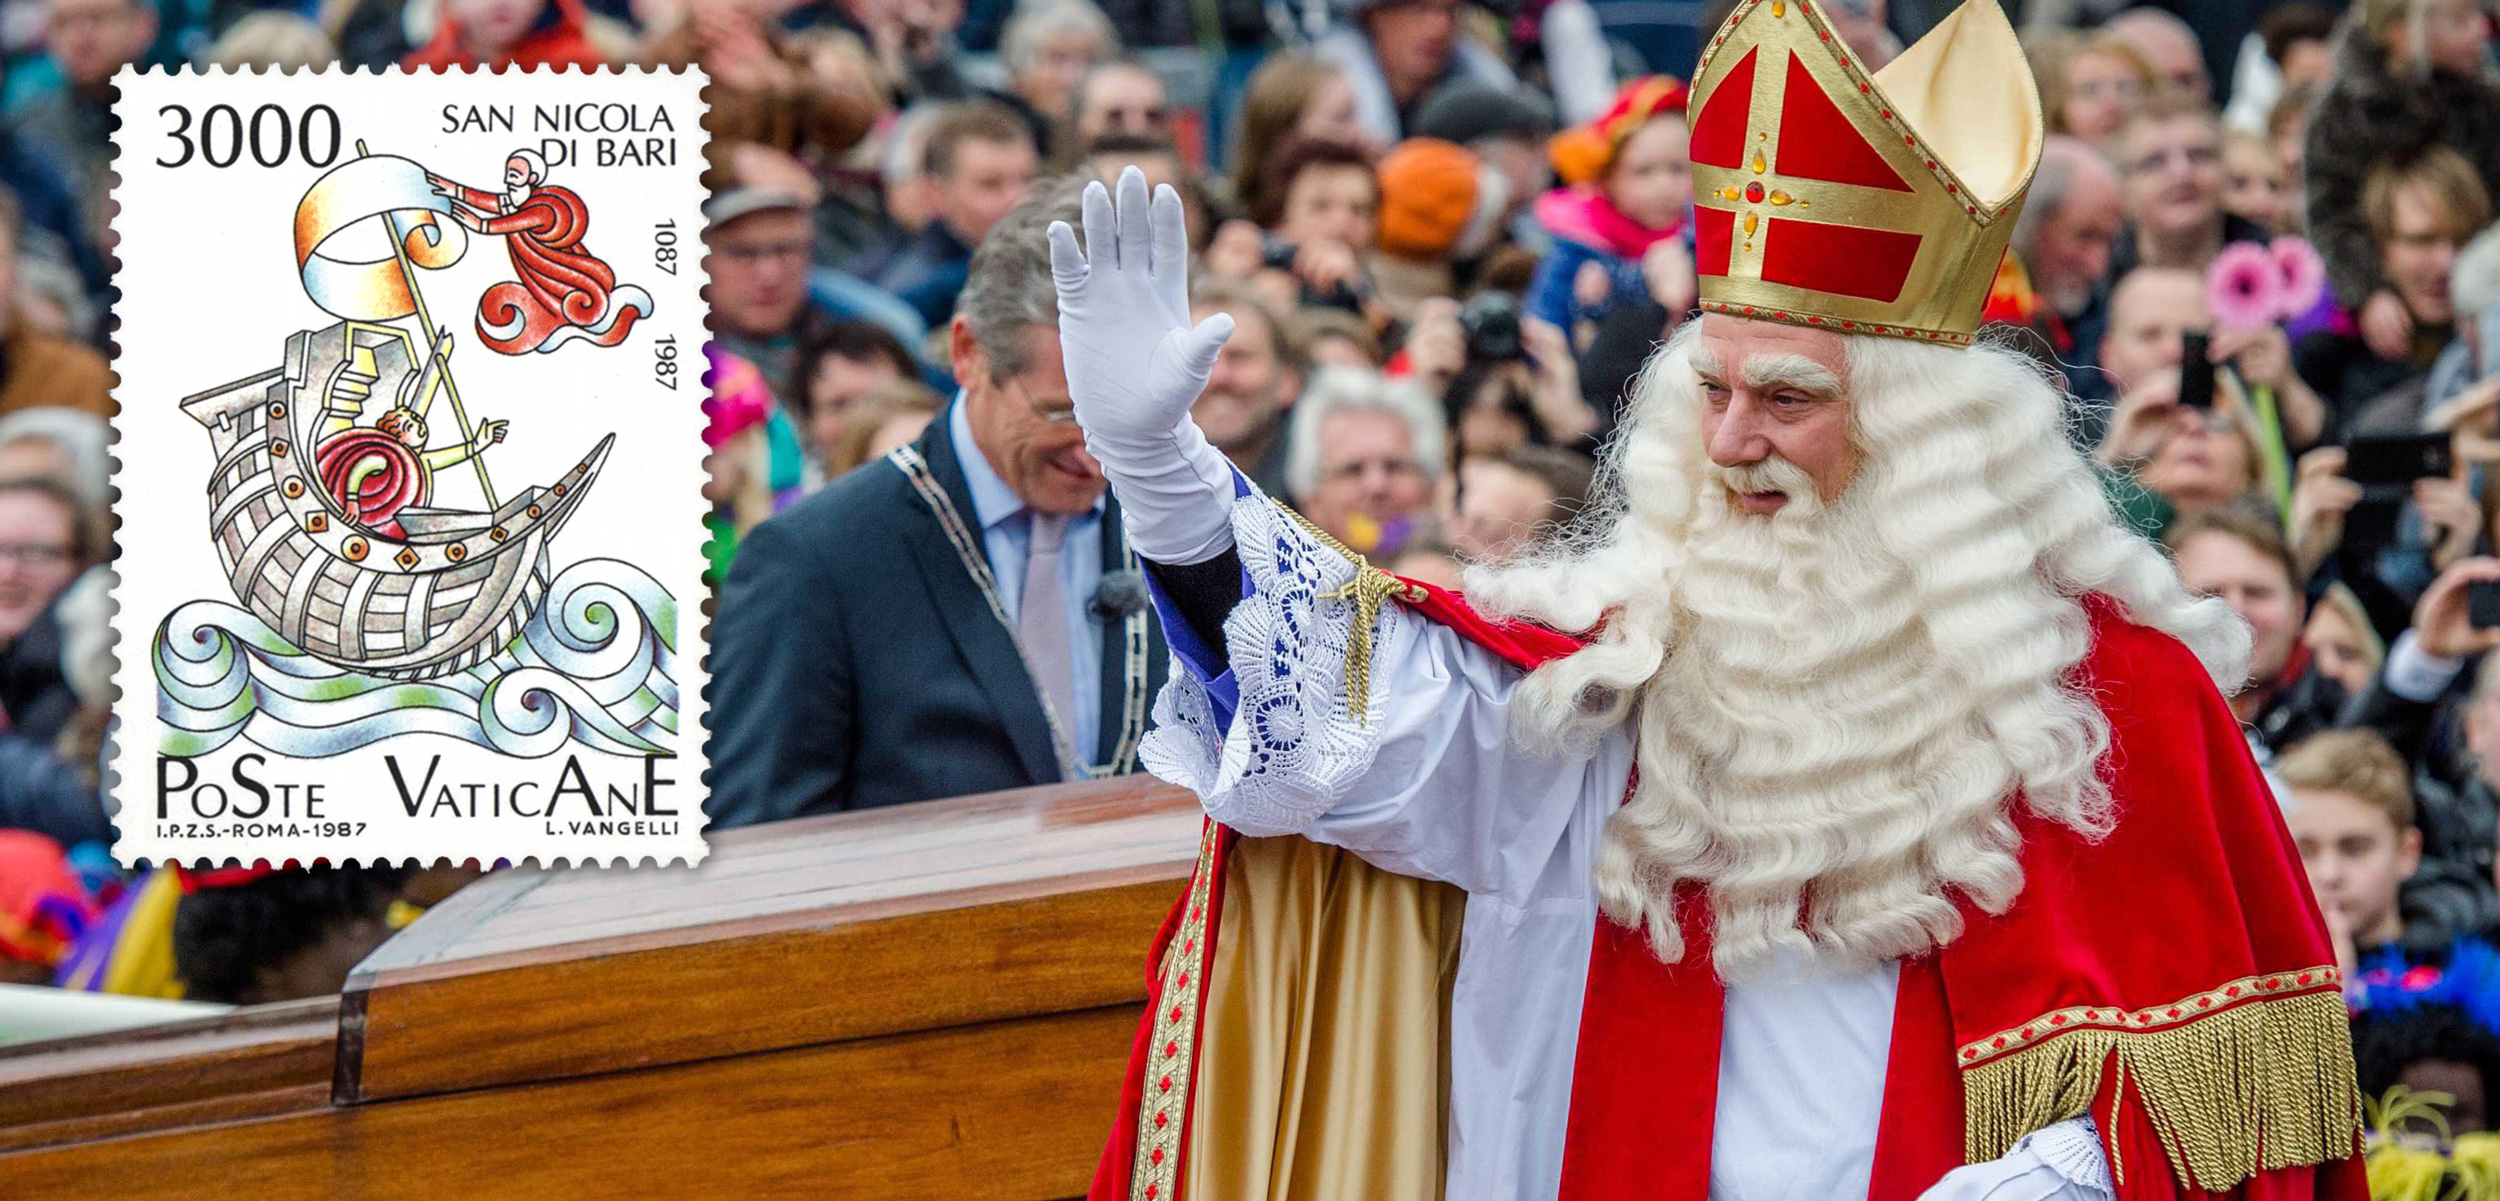 St. Nicholas has a little-known coastal connection: he has been the patron saint of sailors for centuries. Background photo by epa european pressphoto agency b.v./Alamy Stock Photo